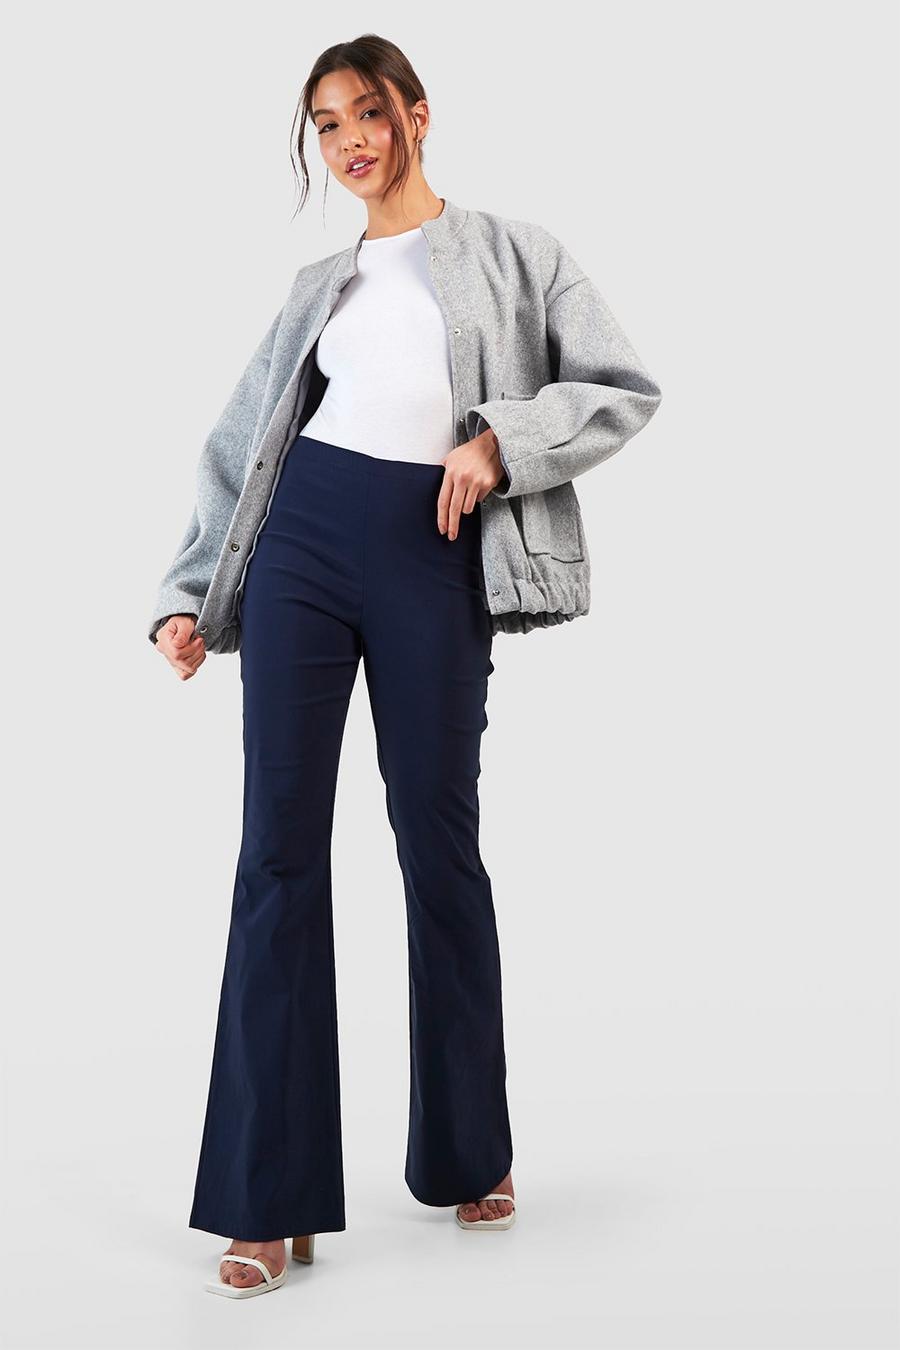 Navy Super Stretch Fit & Flare Tailored Trouser